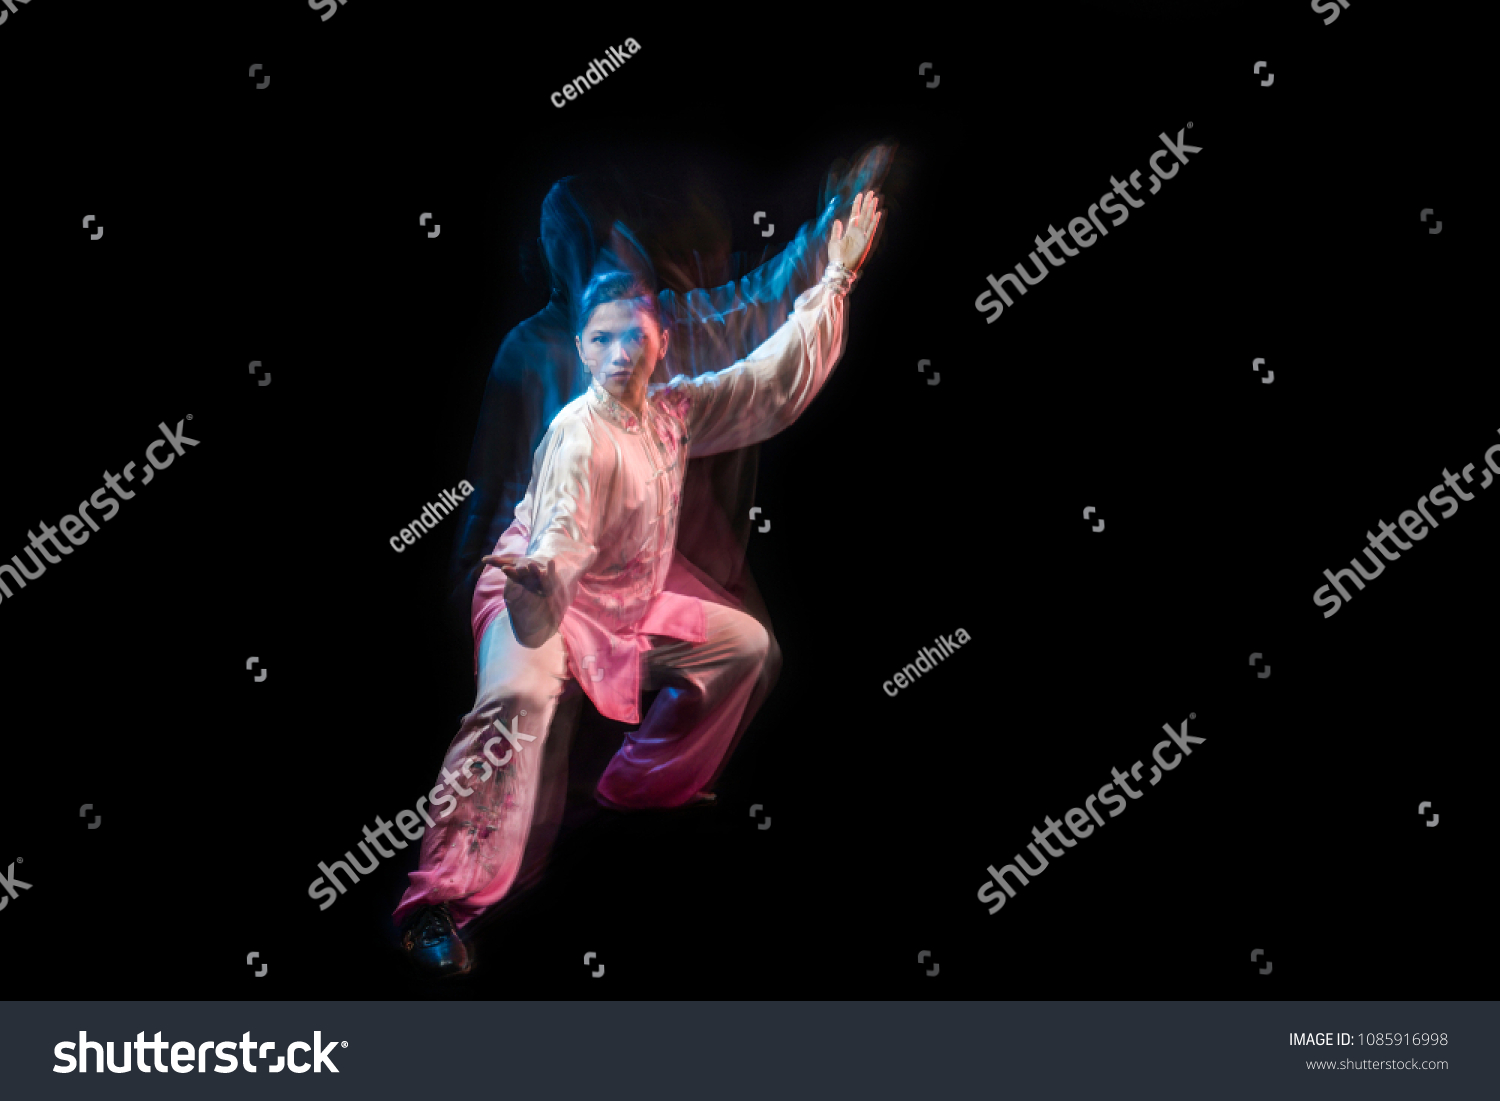 Girl in a white and pink wear engaged wushu against a dark background with slowspeed technic. #1085916998